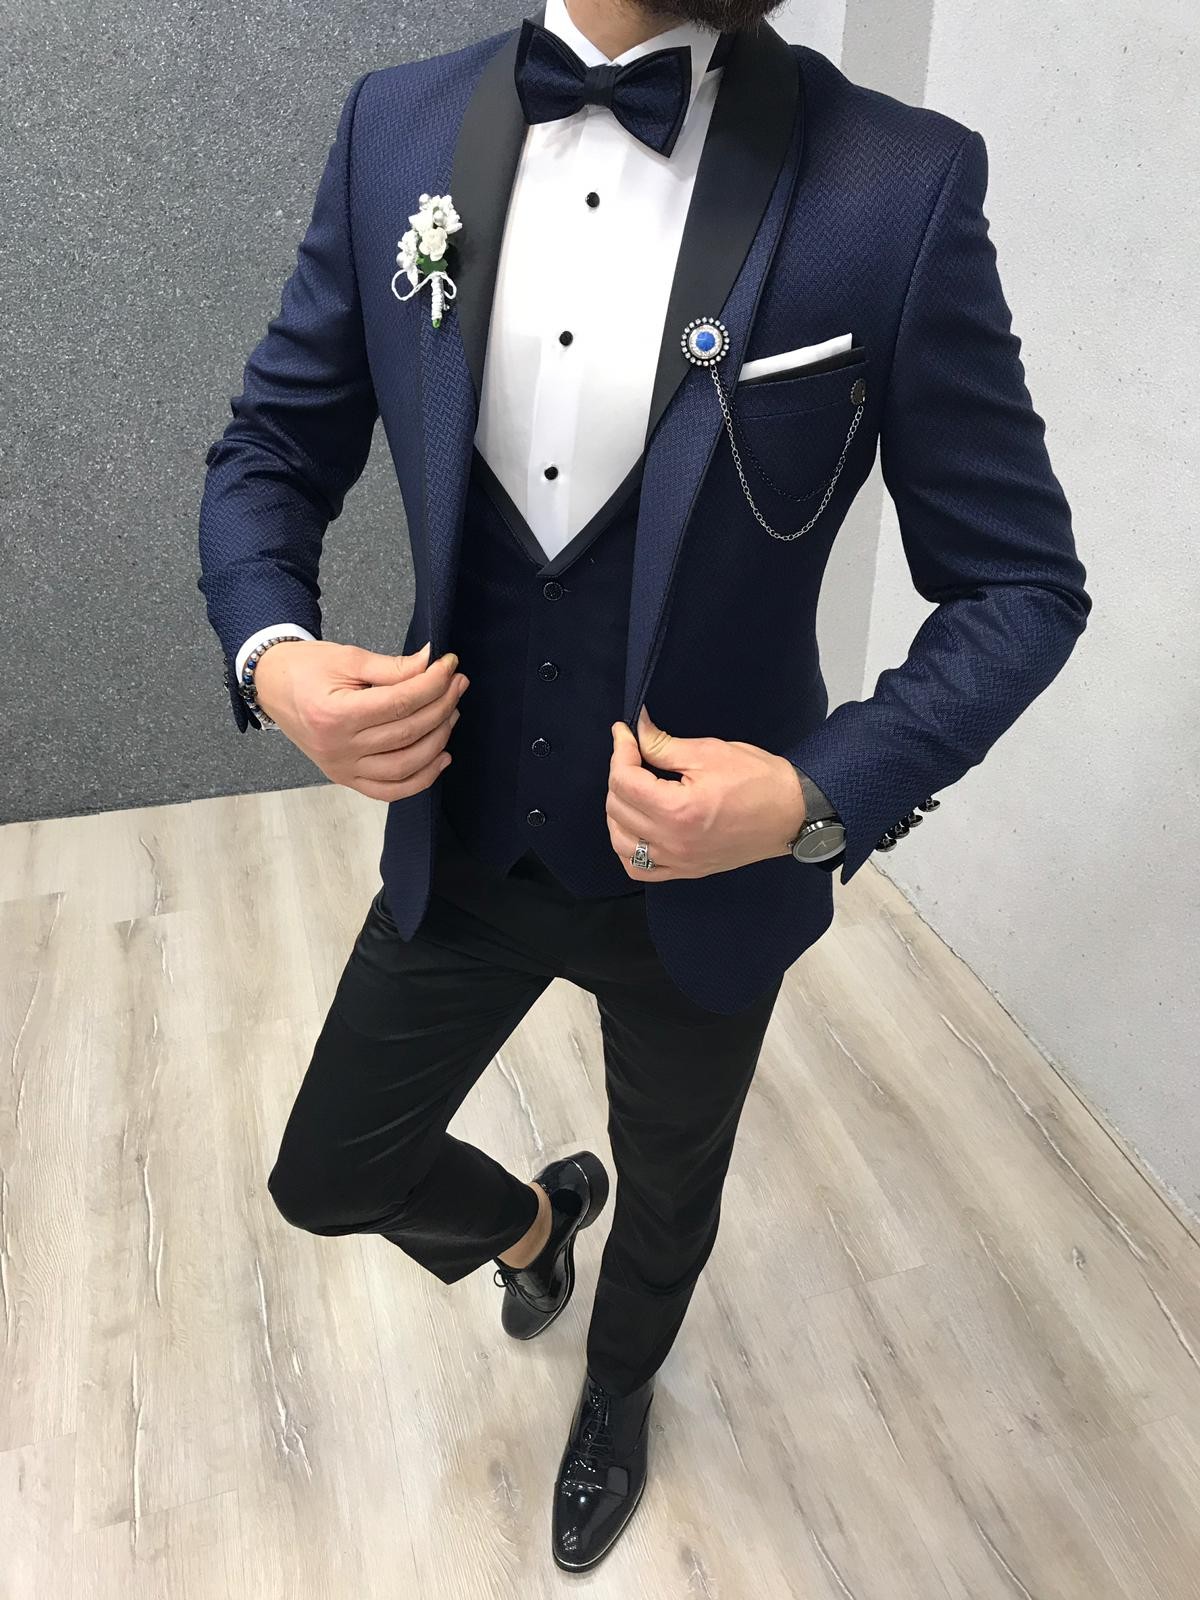 Buy Navy Blue Slim Fit Tuxedo by Gentwith.com with Free Shipping